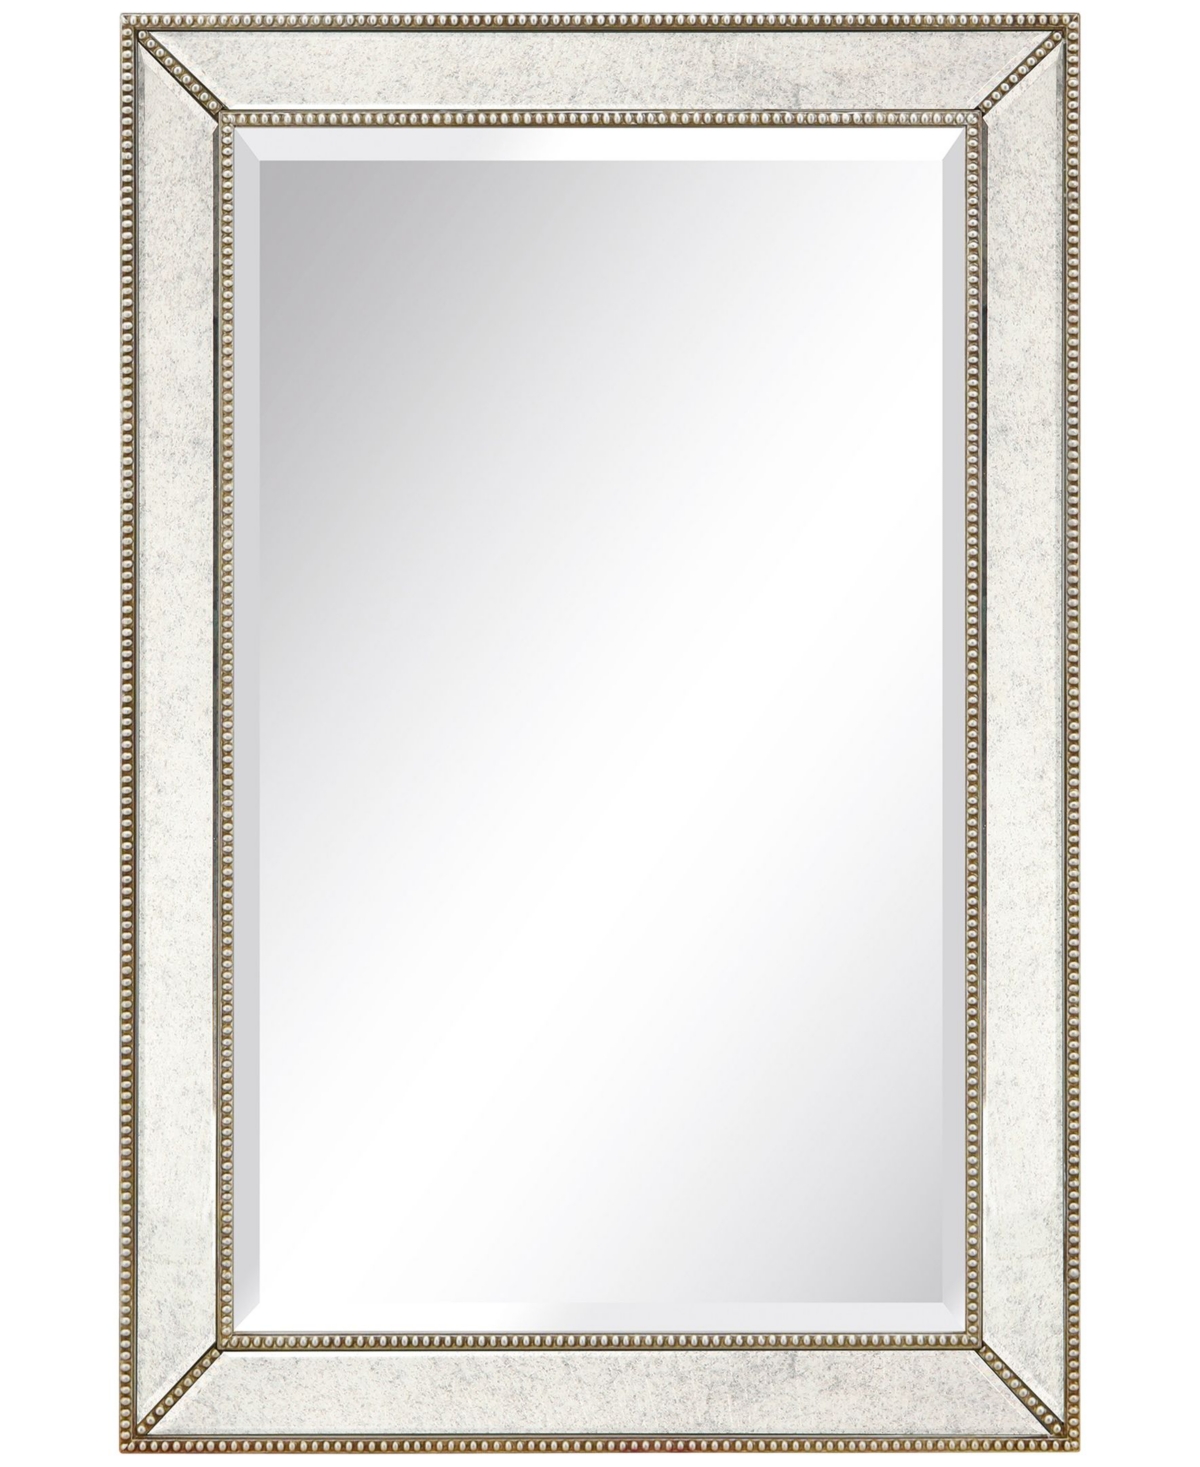 Solid Wood Frame Covered with Beveled Antique Mirror Panels - 24" x 36" - Champagne